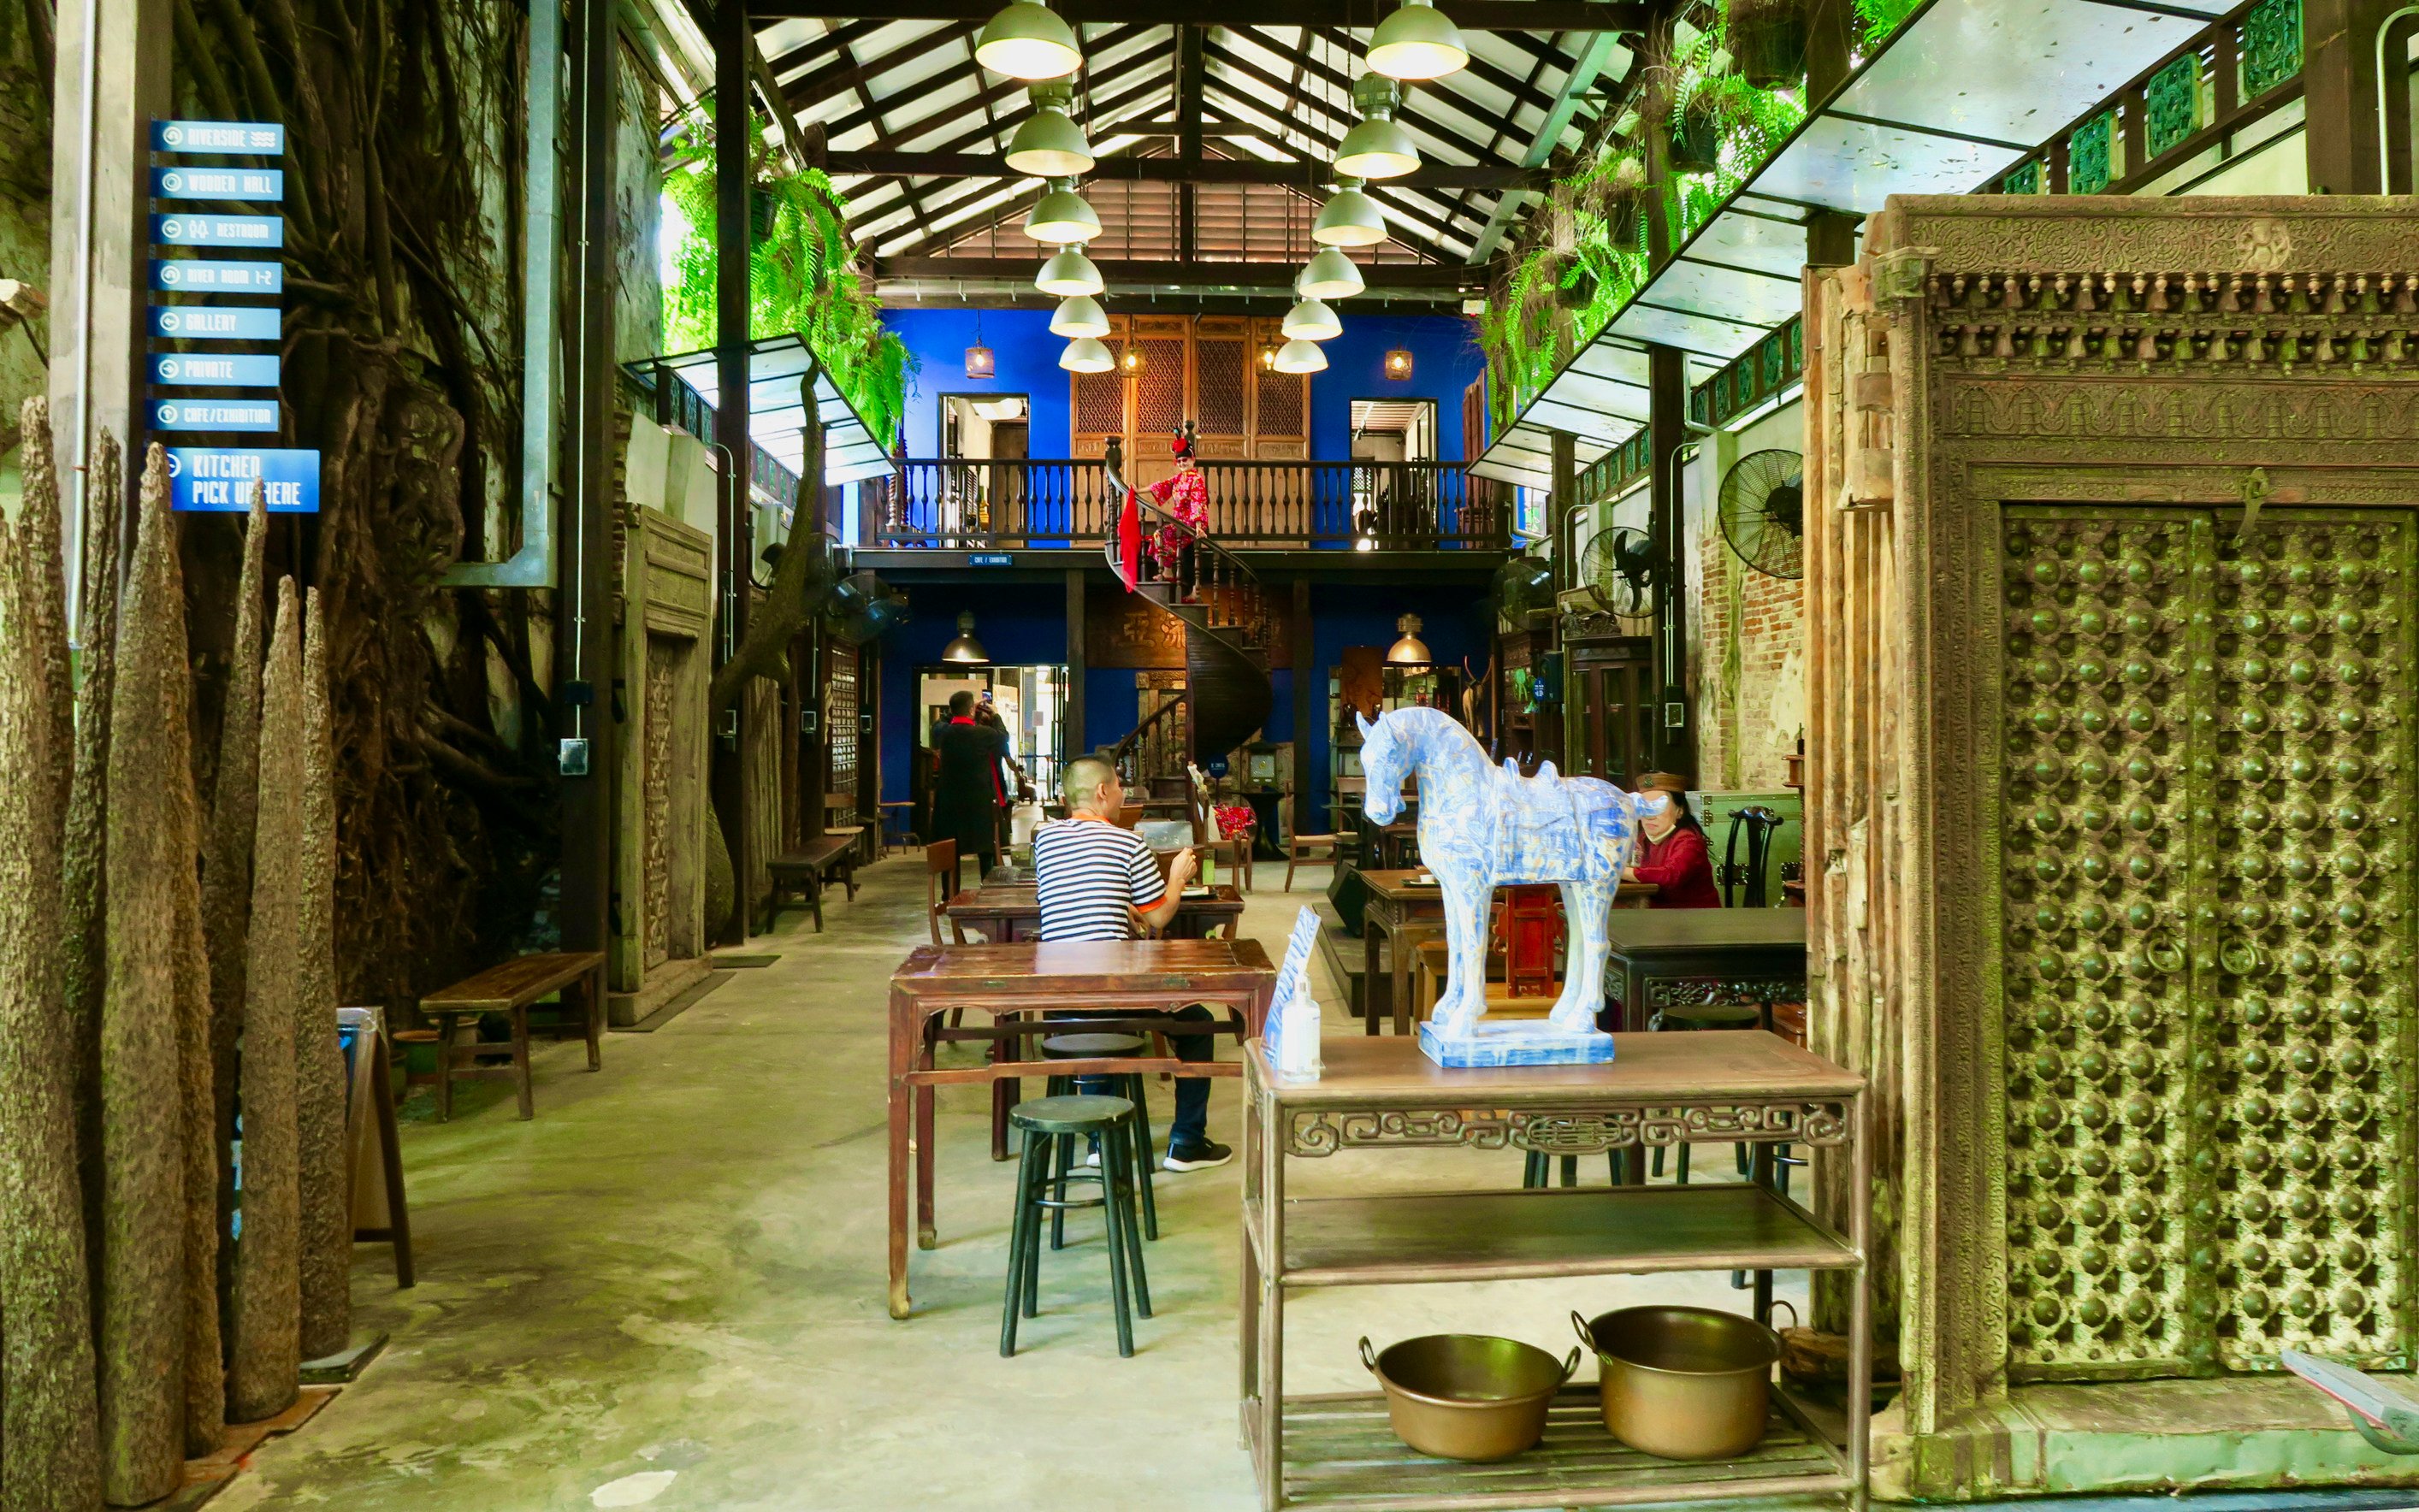 Hong Sieng Kong is a gallery and cafe furnished with antiques in renovated shophouses in Bangkok’s Charoenkrung Road neighbourhood. Photo: Mavis Teo